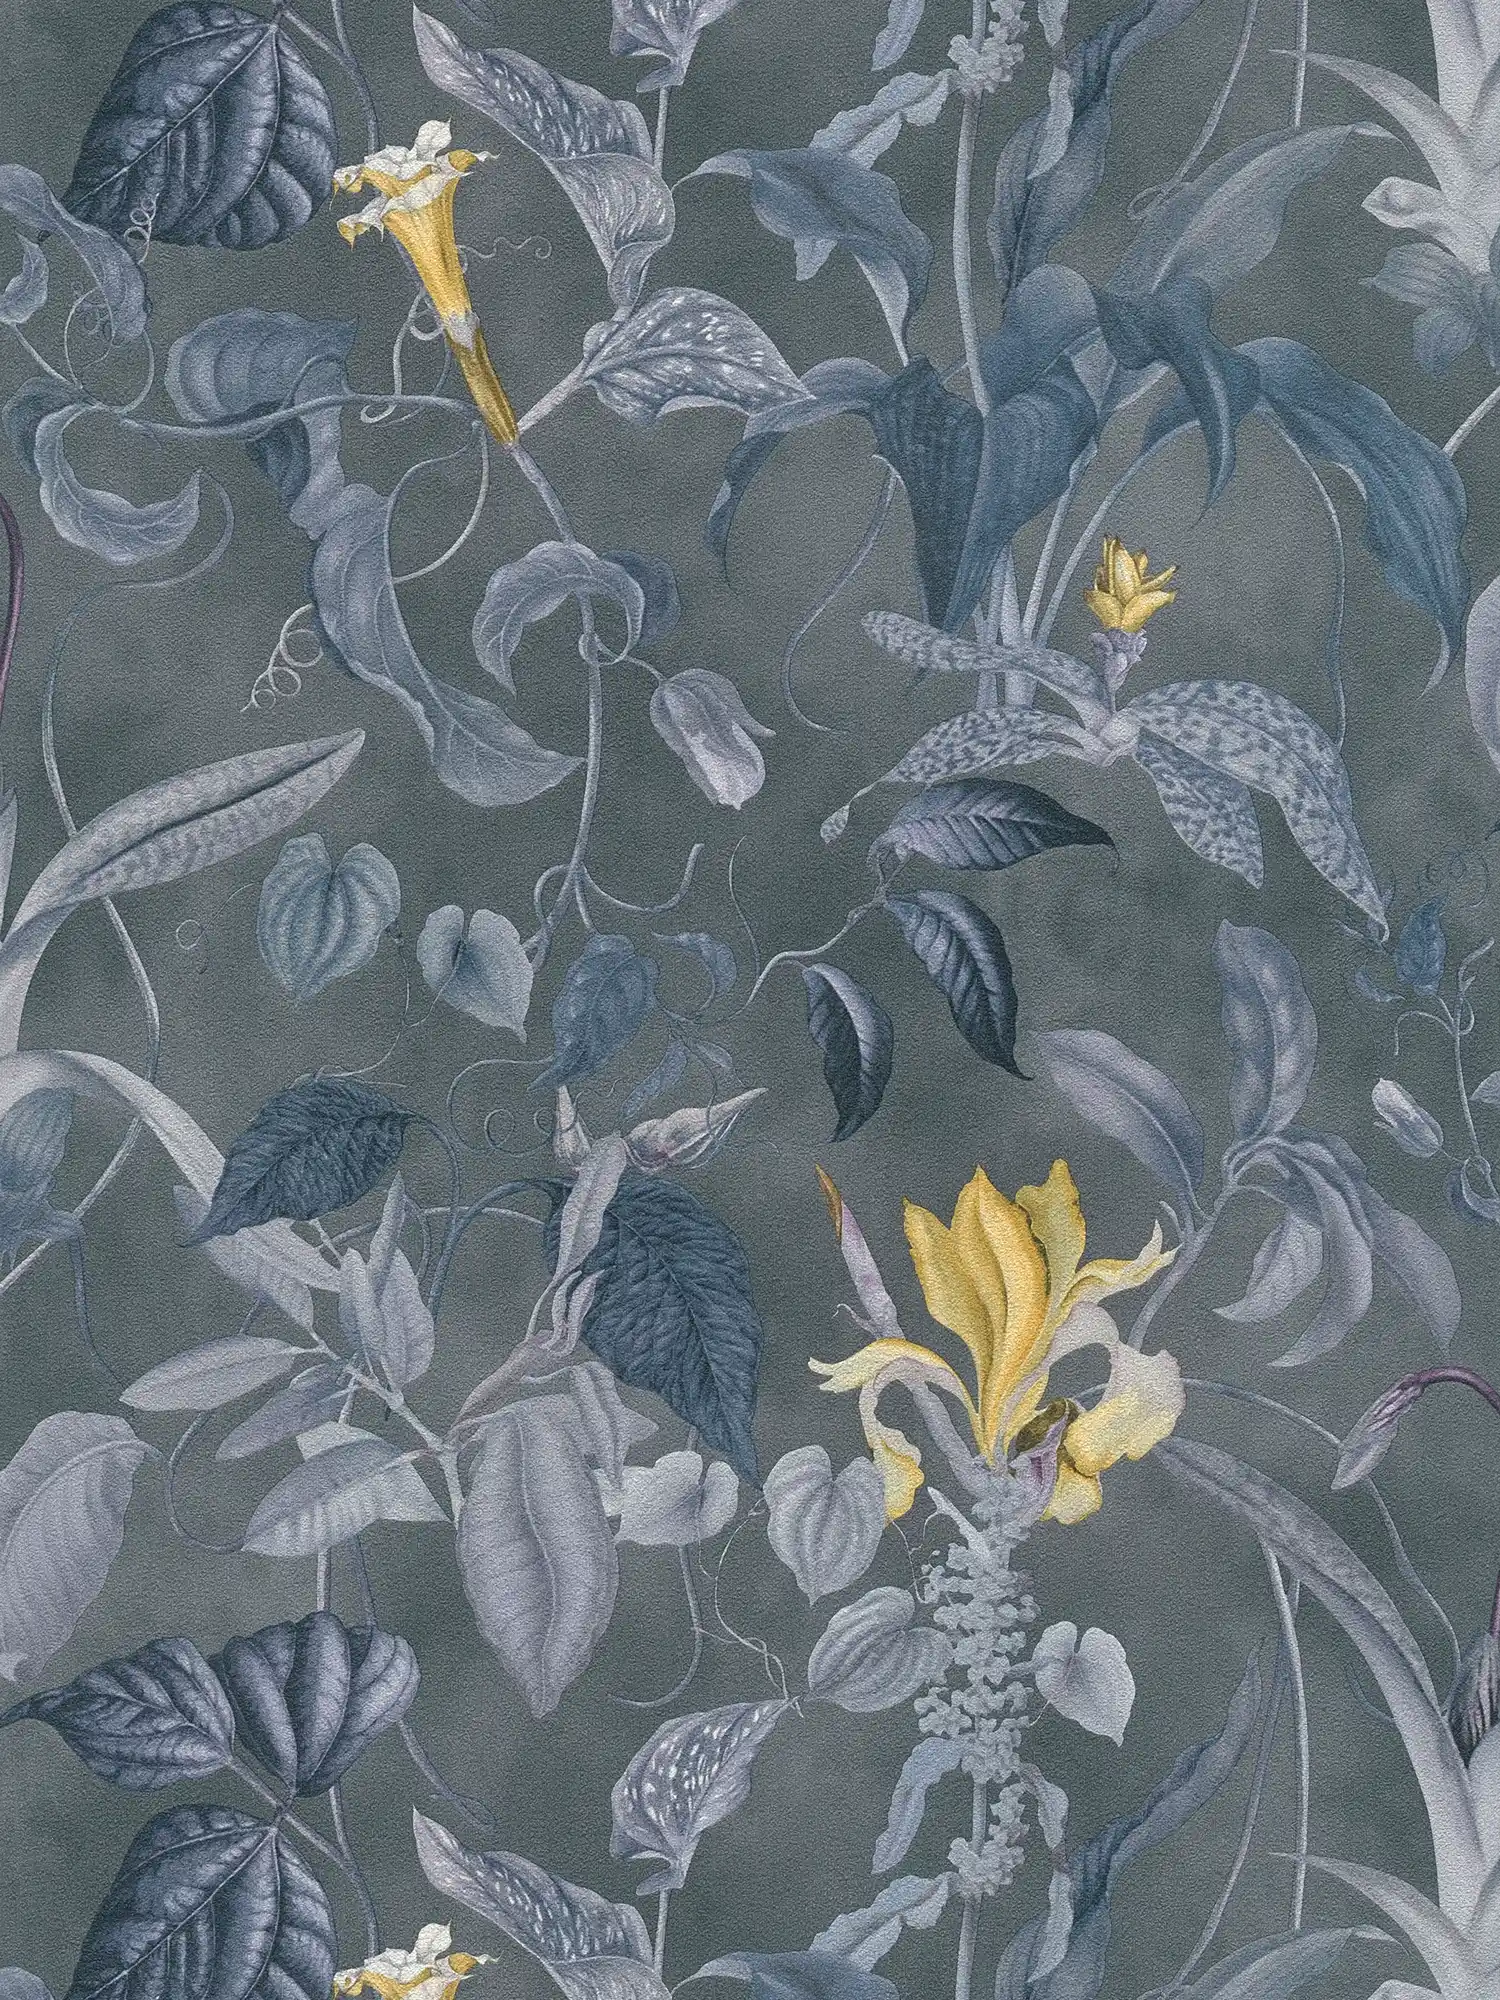 Tropical floral wallpaper grey-blue, Design by MICHALSKY
